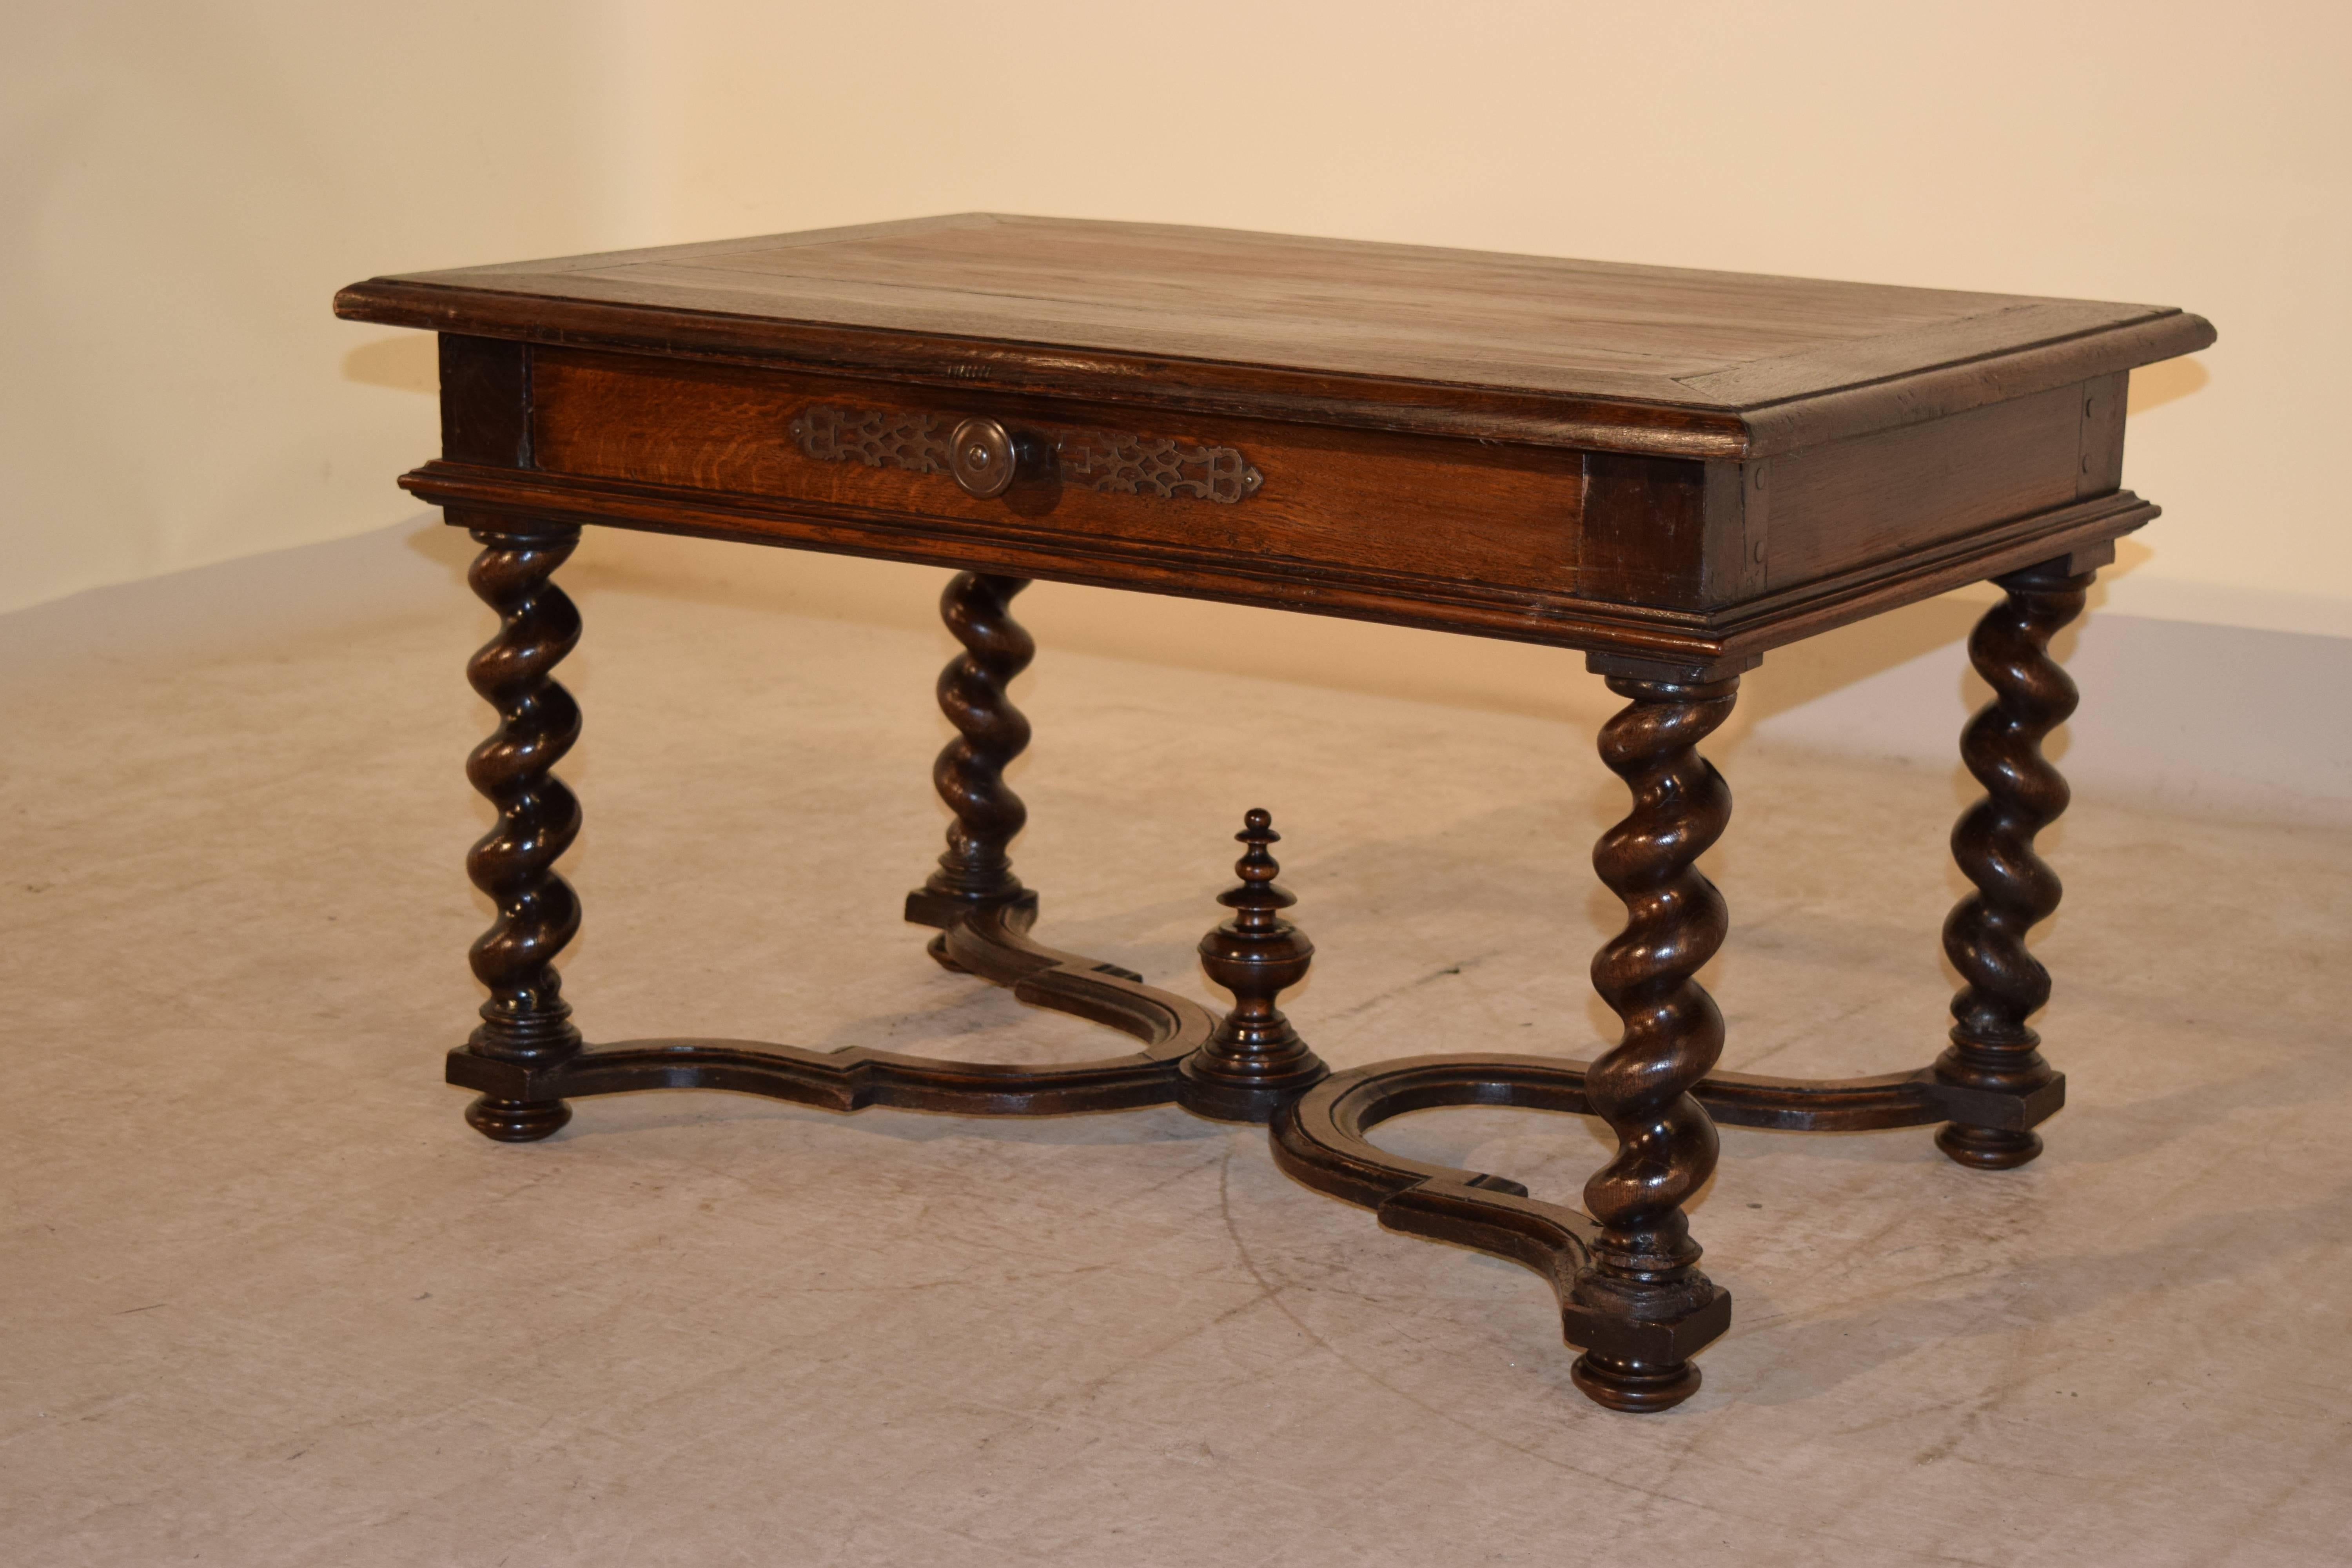 19th century French oak coffee table with a banded and beveled edge around the top. The apron is simple and has a single drawer, following down to a molded edge and raised on hand-turned barley twist legs joined by serpentine shaped stretchers with